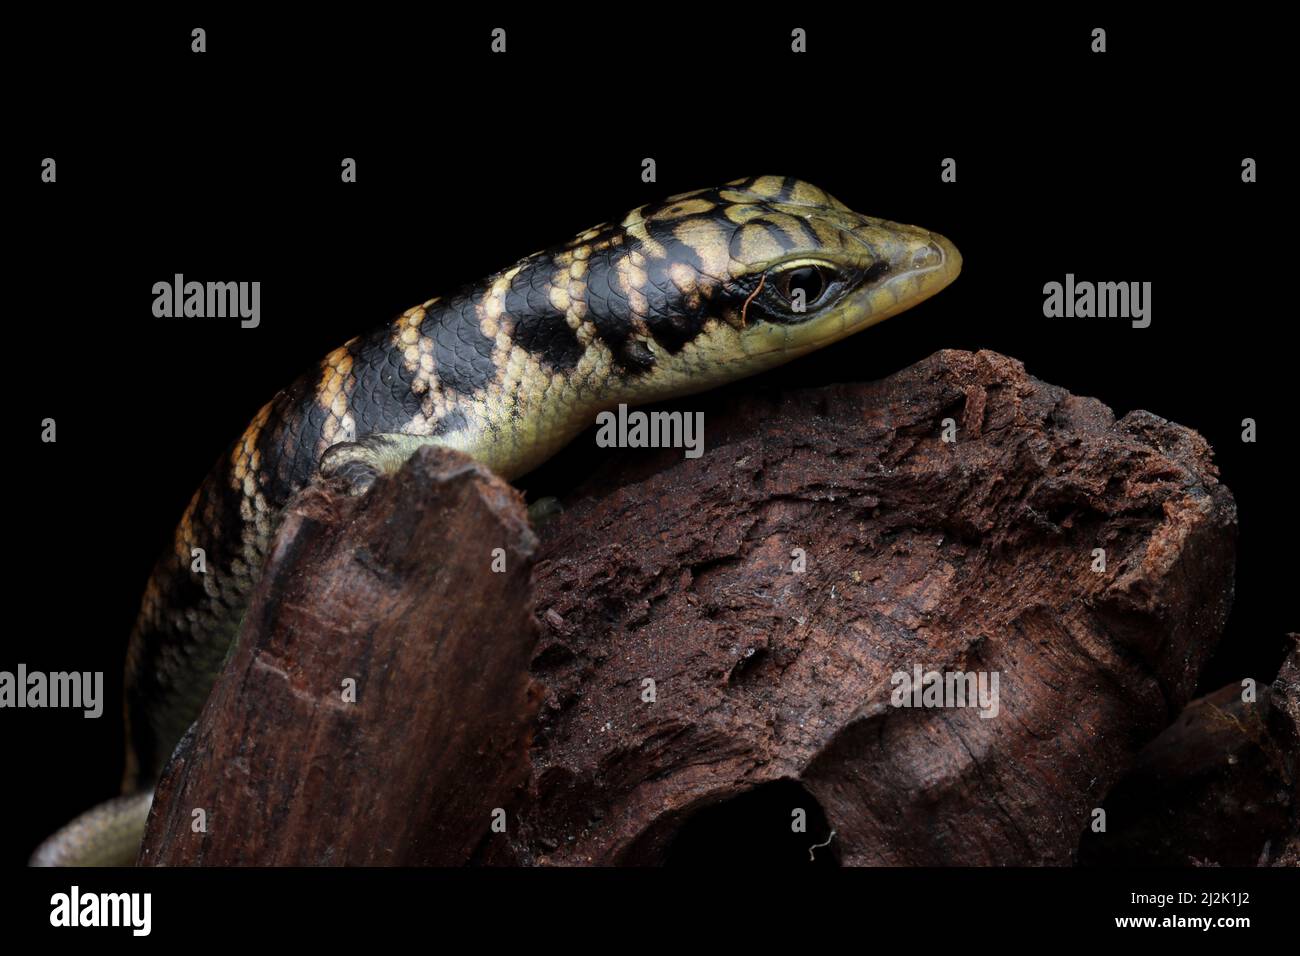 Close-up of a juvenile Olive tree skink (dasia olivacea) on wood, Indonesia Stock Photo